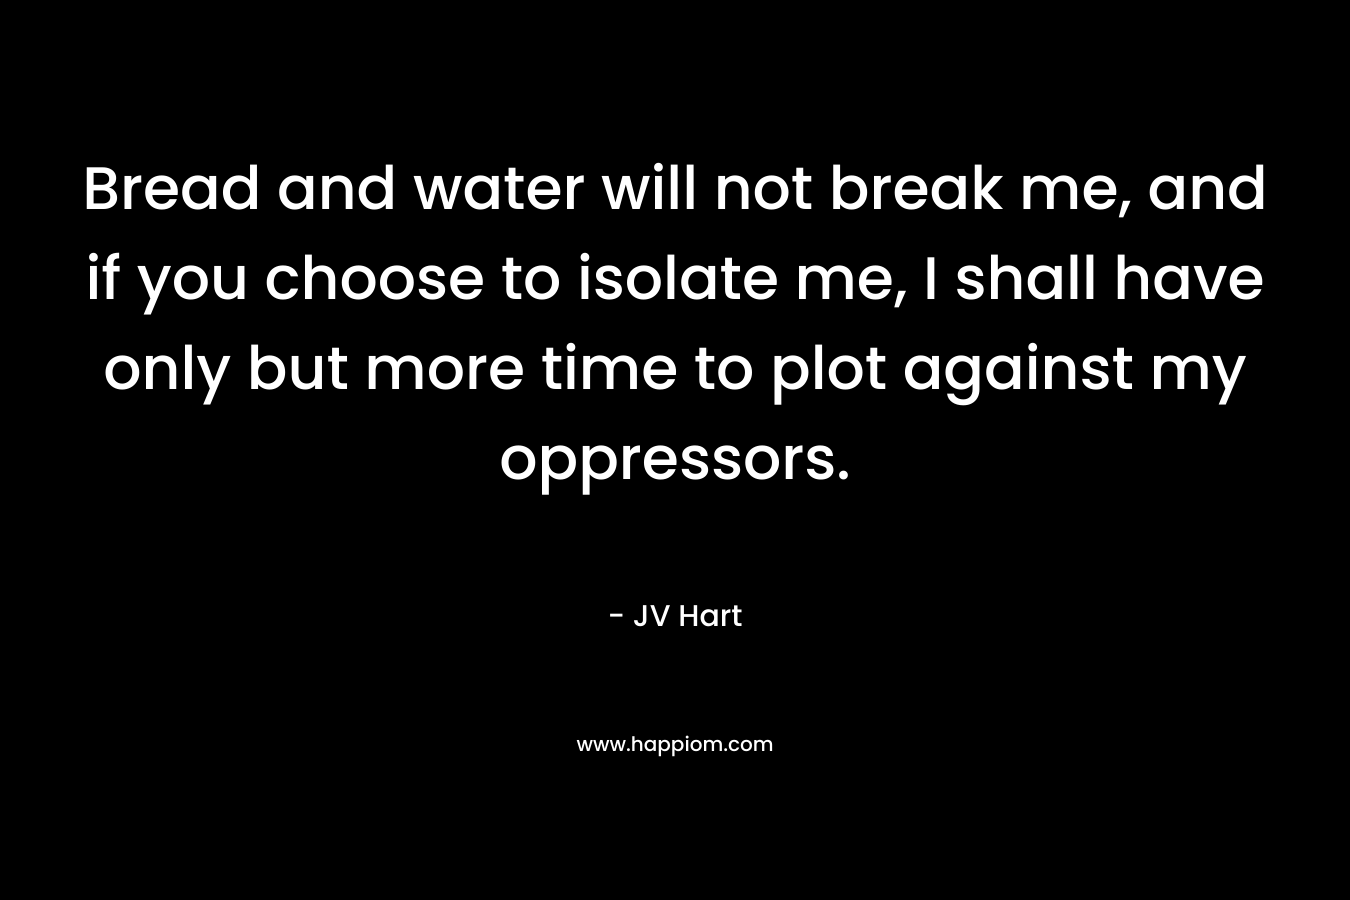 Bread and water will not break me, and if you choose to isolate me, I shall have only but more time to plot against my oppressors. – JV Hart